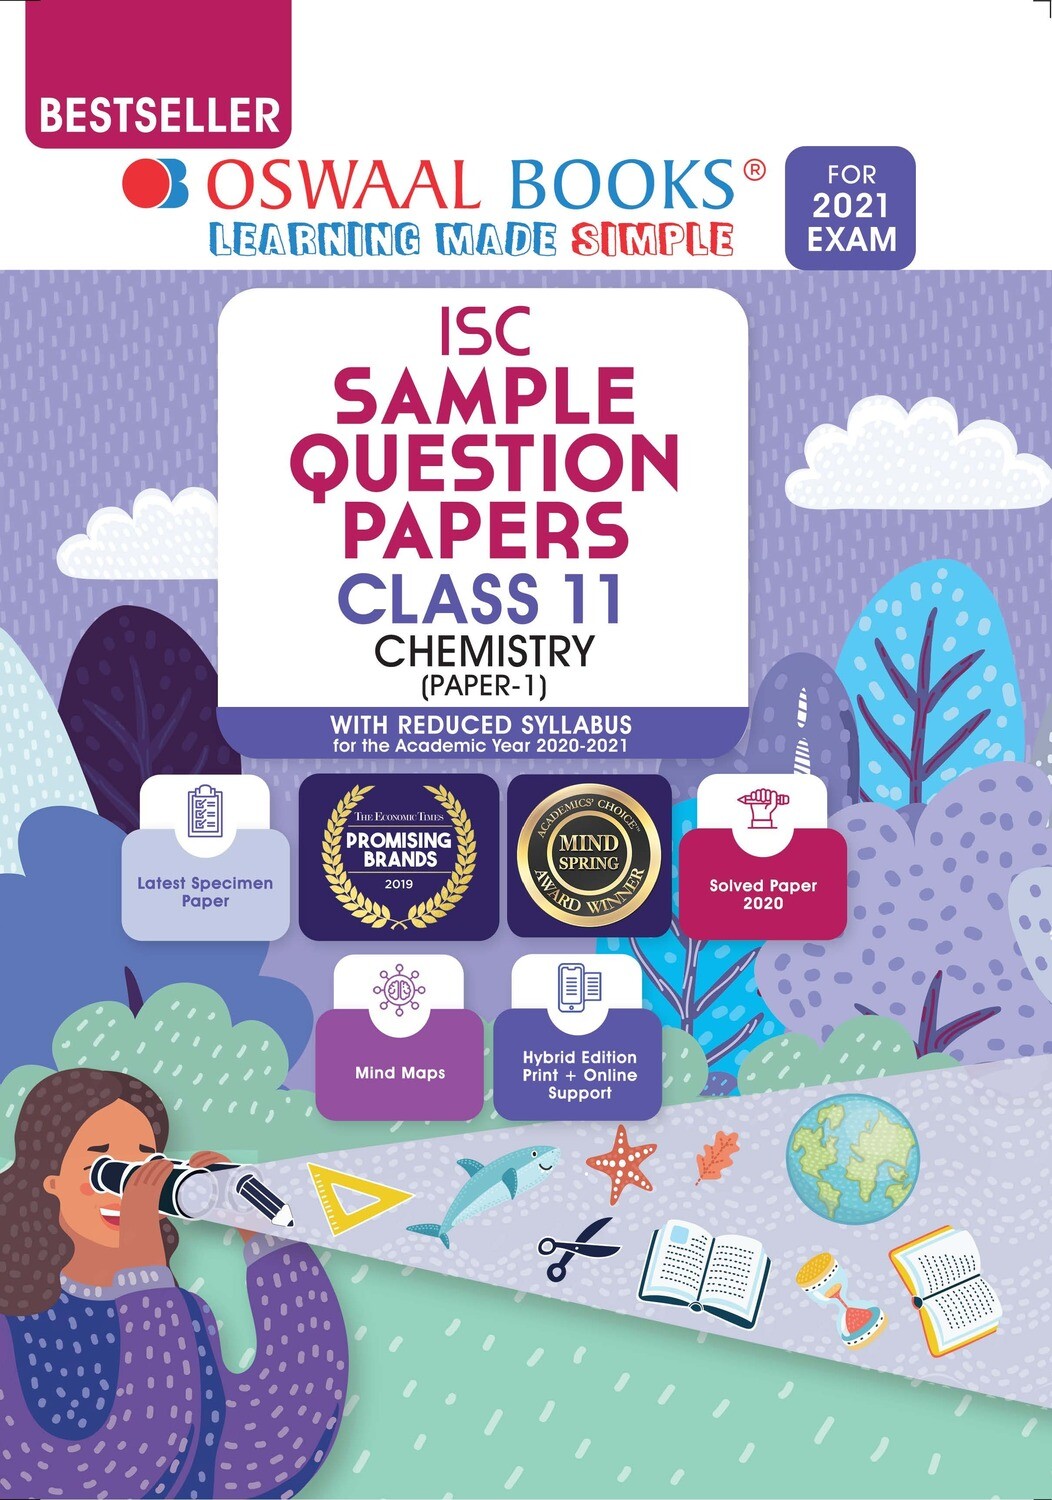 Buy e-book: Oswaal ISC Sample Question Paper Class 11 Chemistry (For 2021 Exam)